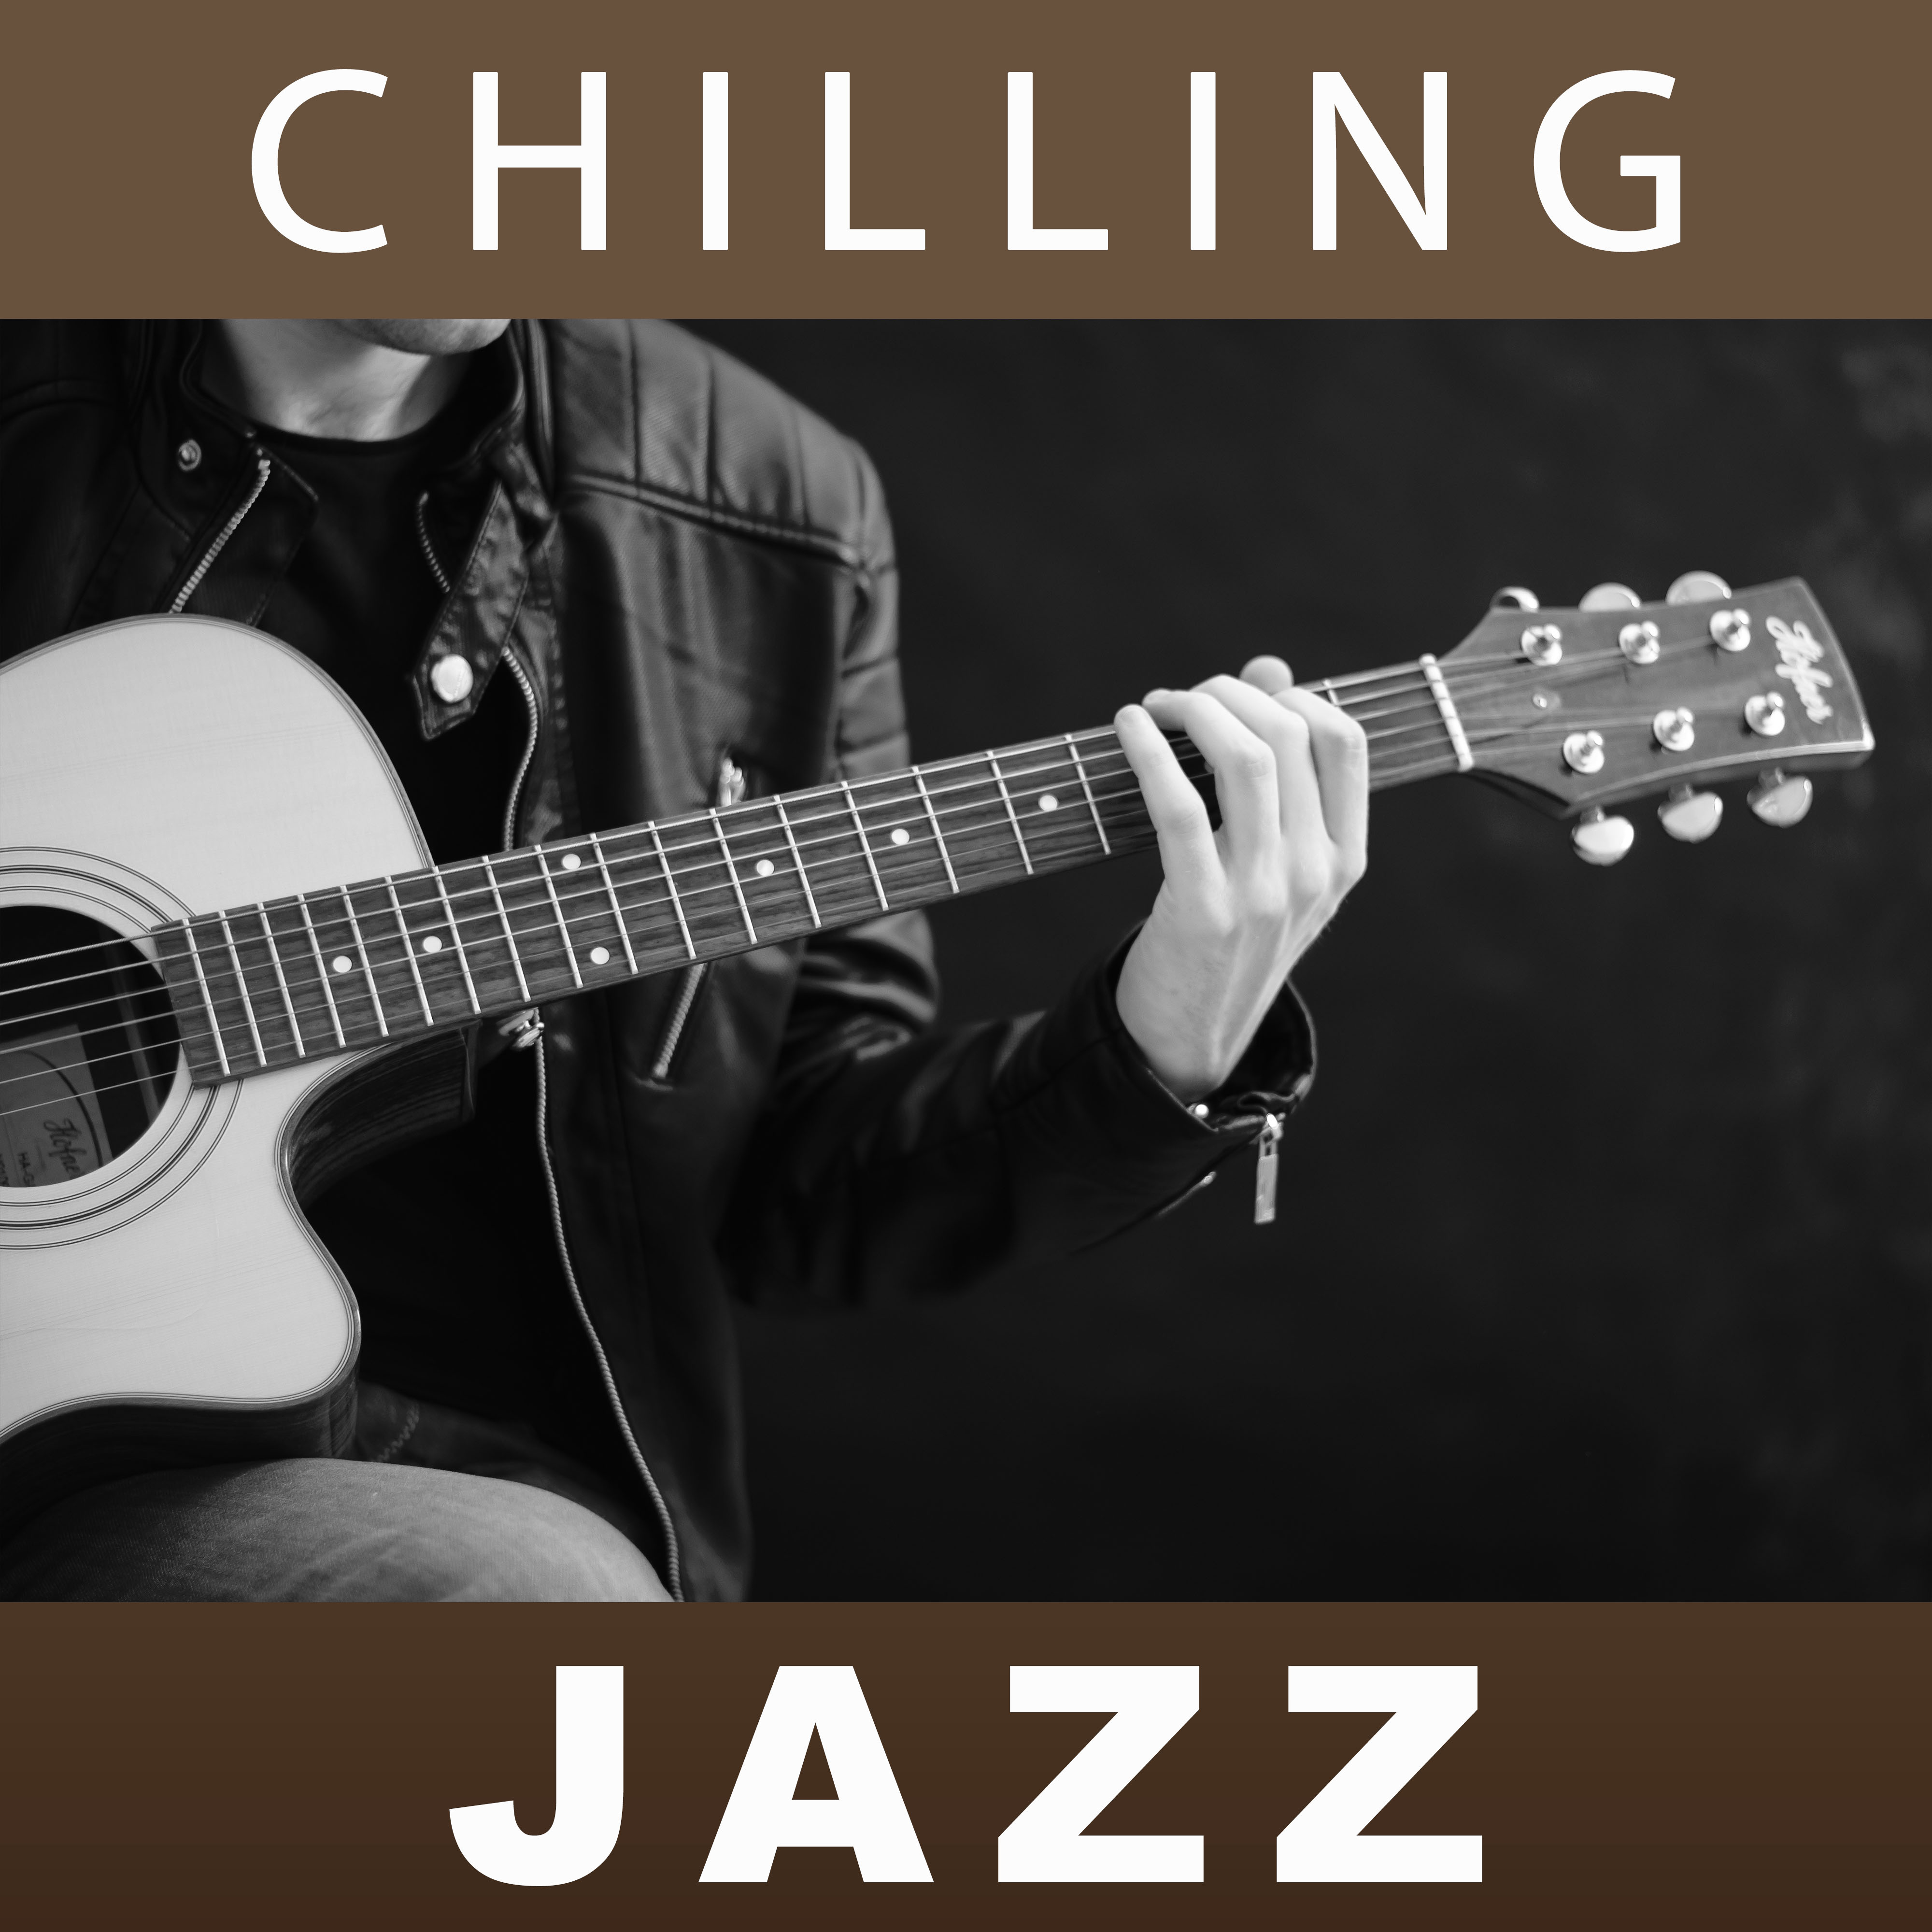 Chilling Jazz  Saxophone Vibes for  and Erotic Massage, Romantic Music, Jazz Bar, Cocktail Bar, Lounge Jazz, Sensual Smooth Jazz Sounds